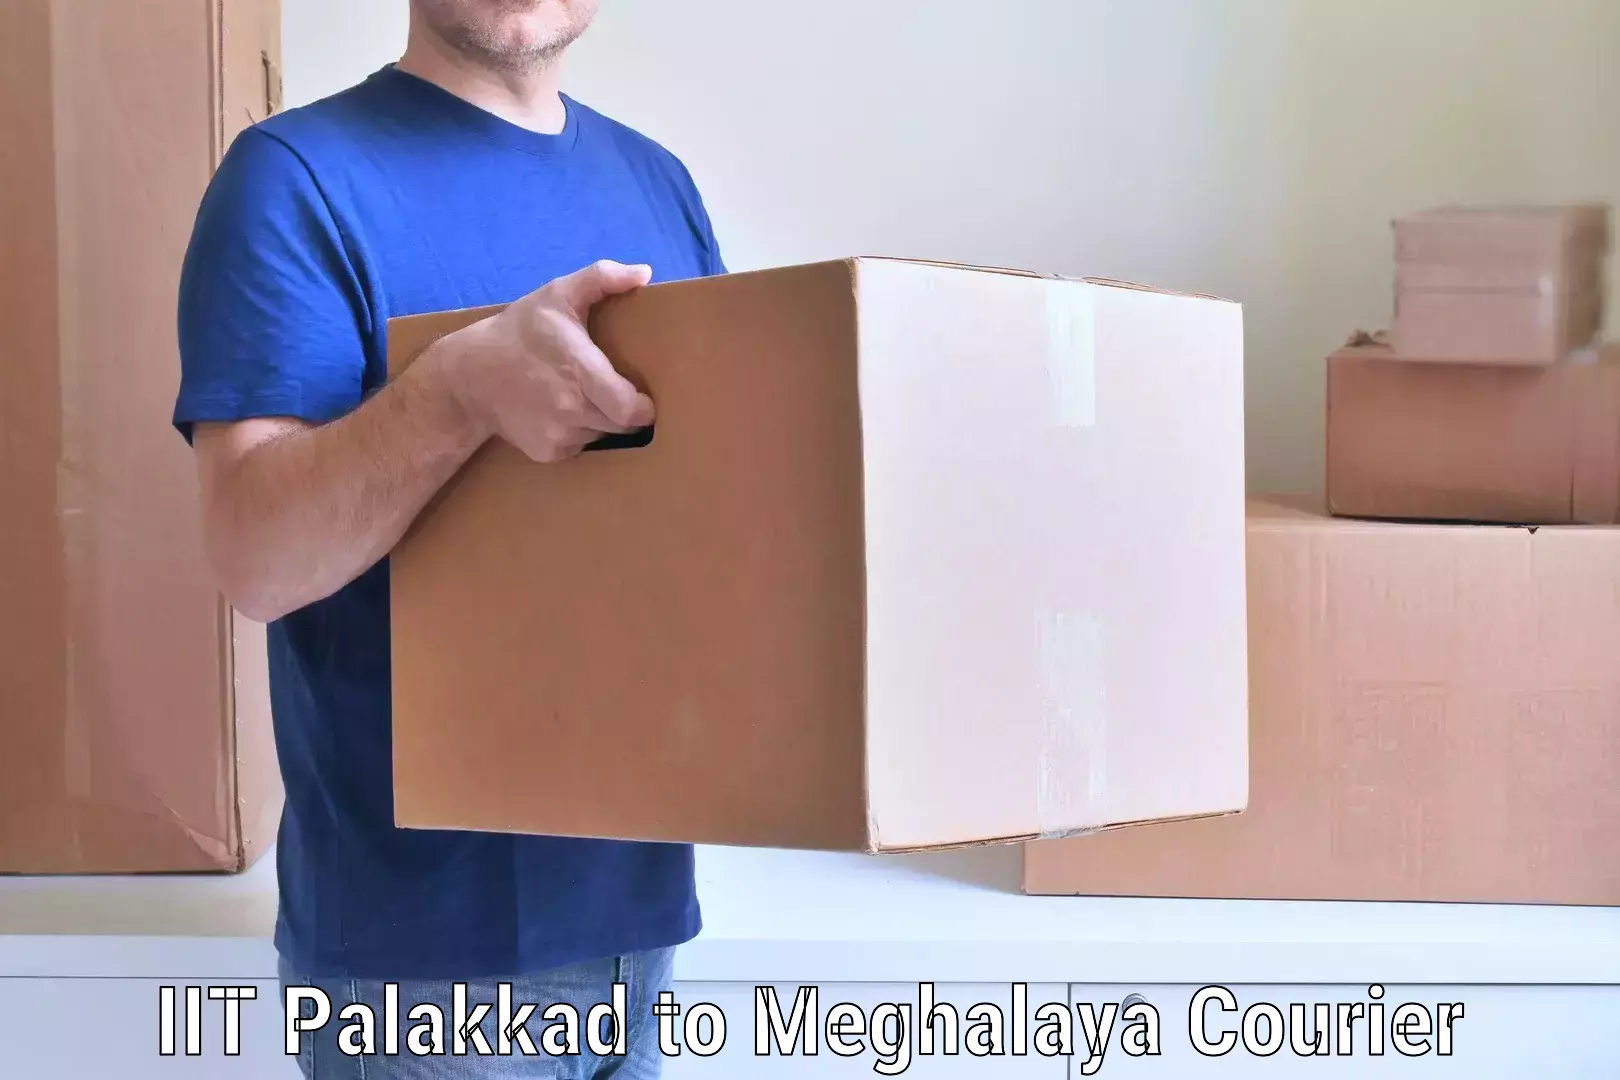 Quality relocation services IIT Palakkad to Meghalaya